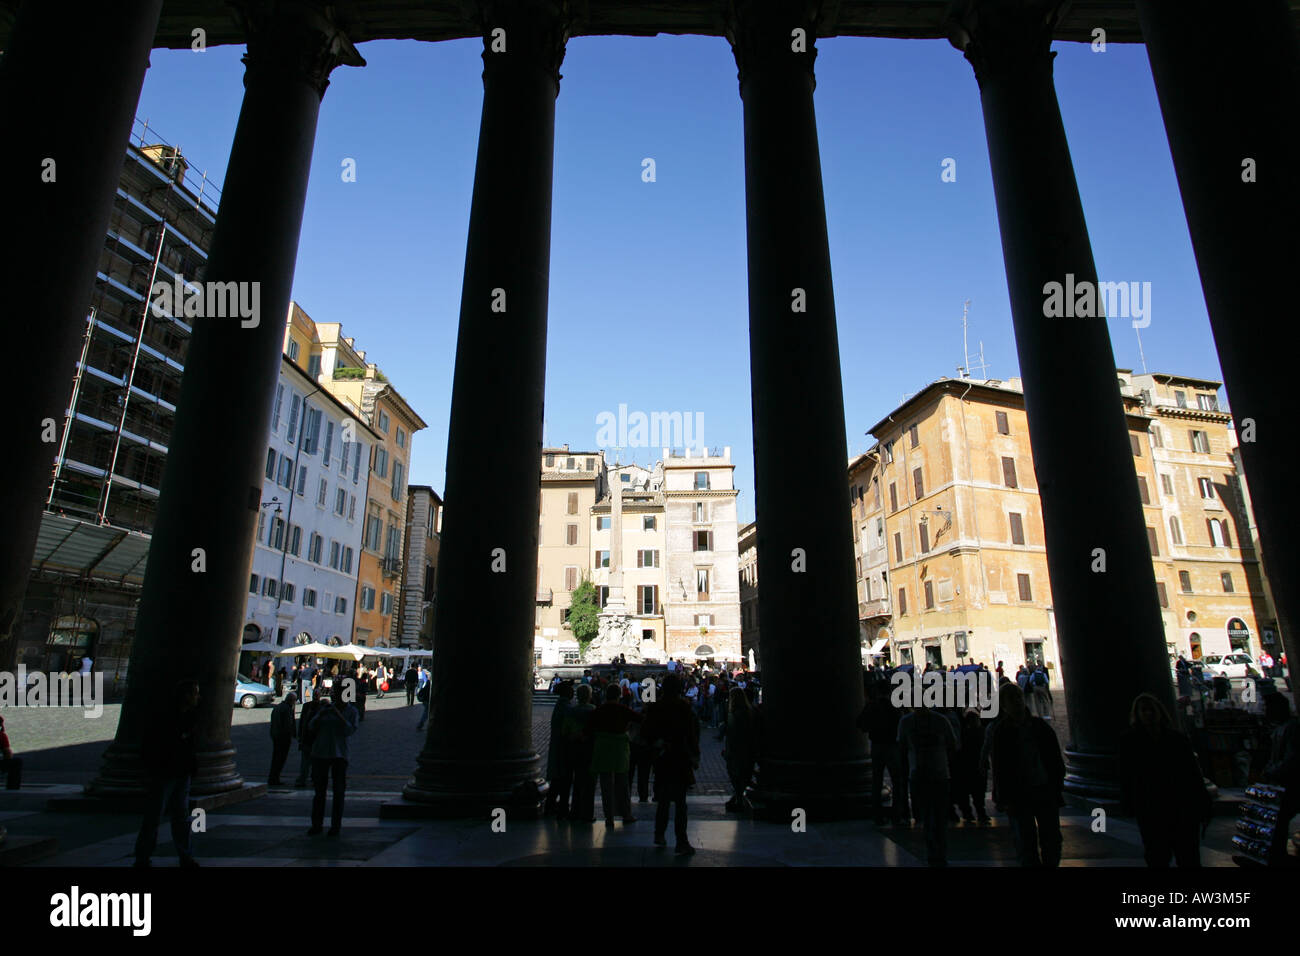 Tourists enter the famous ancient Pantheon building between corinthian stone columns in silhouette, Rome Italy Europe Stock Photo